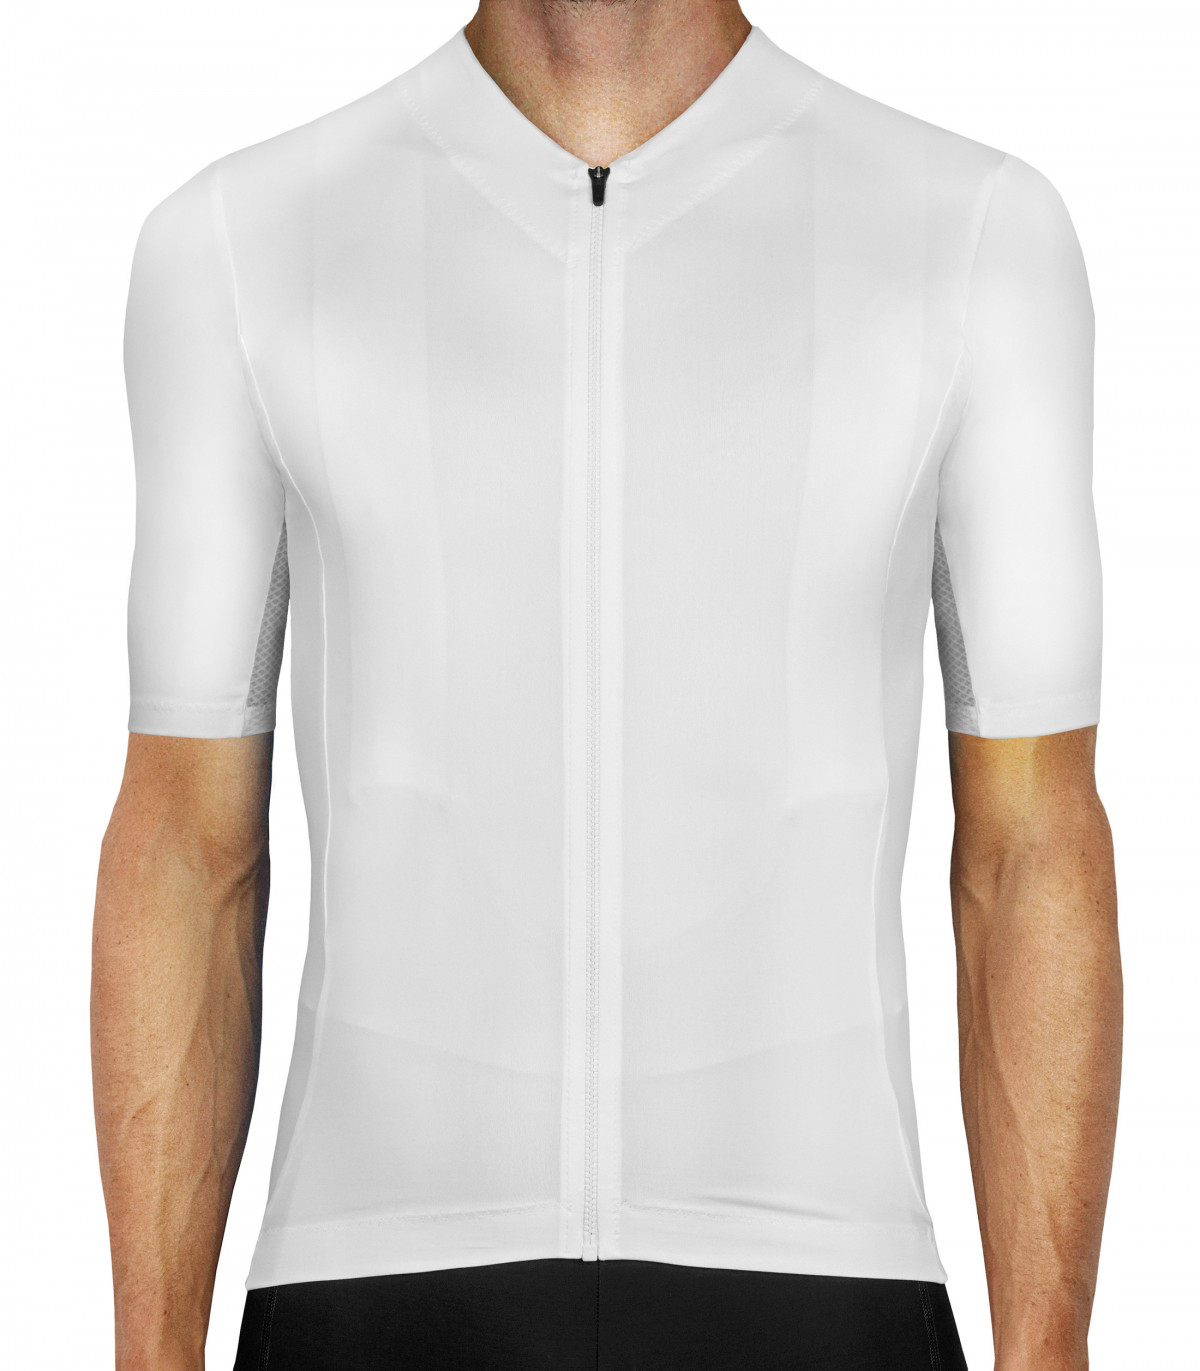 white cycle jersey